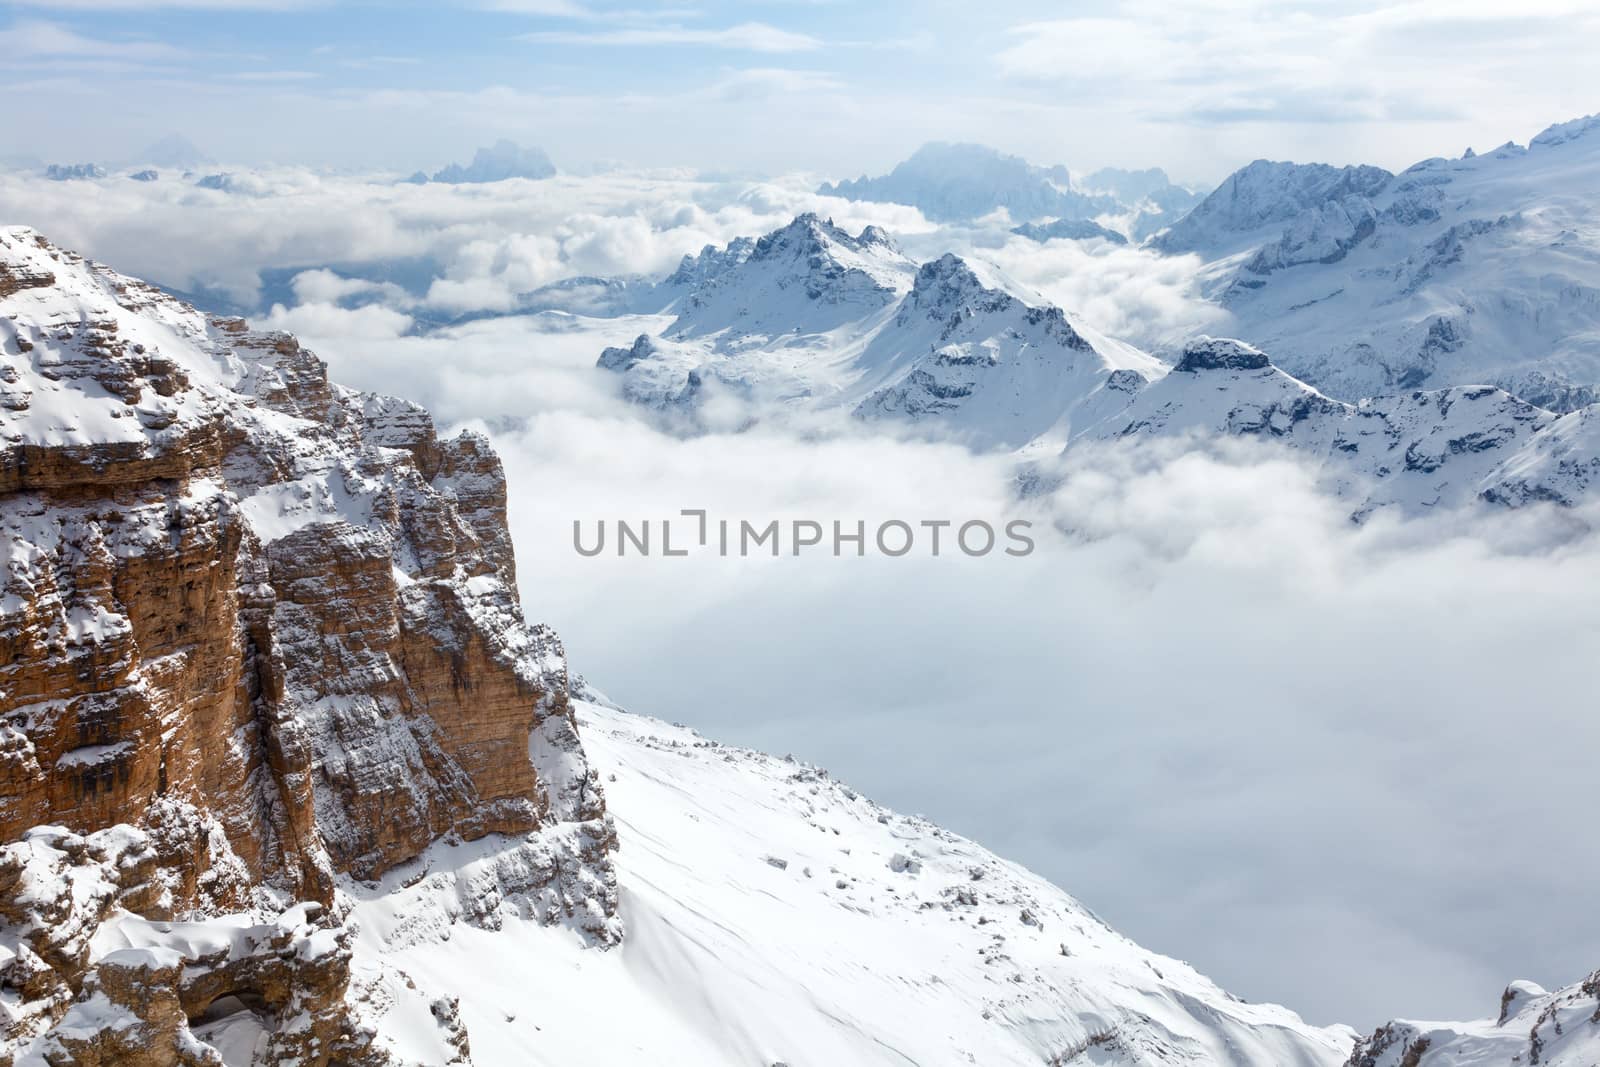 Dolomites mountains by naumoid